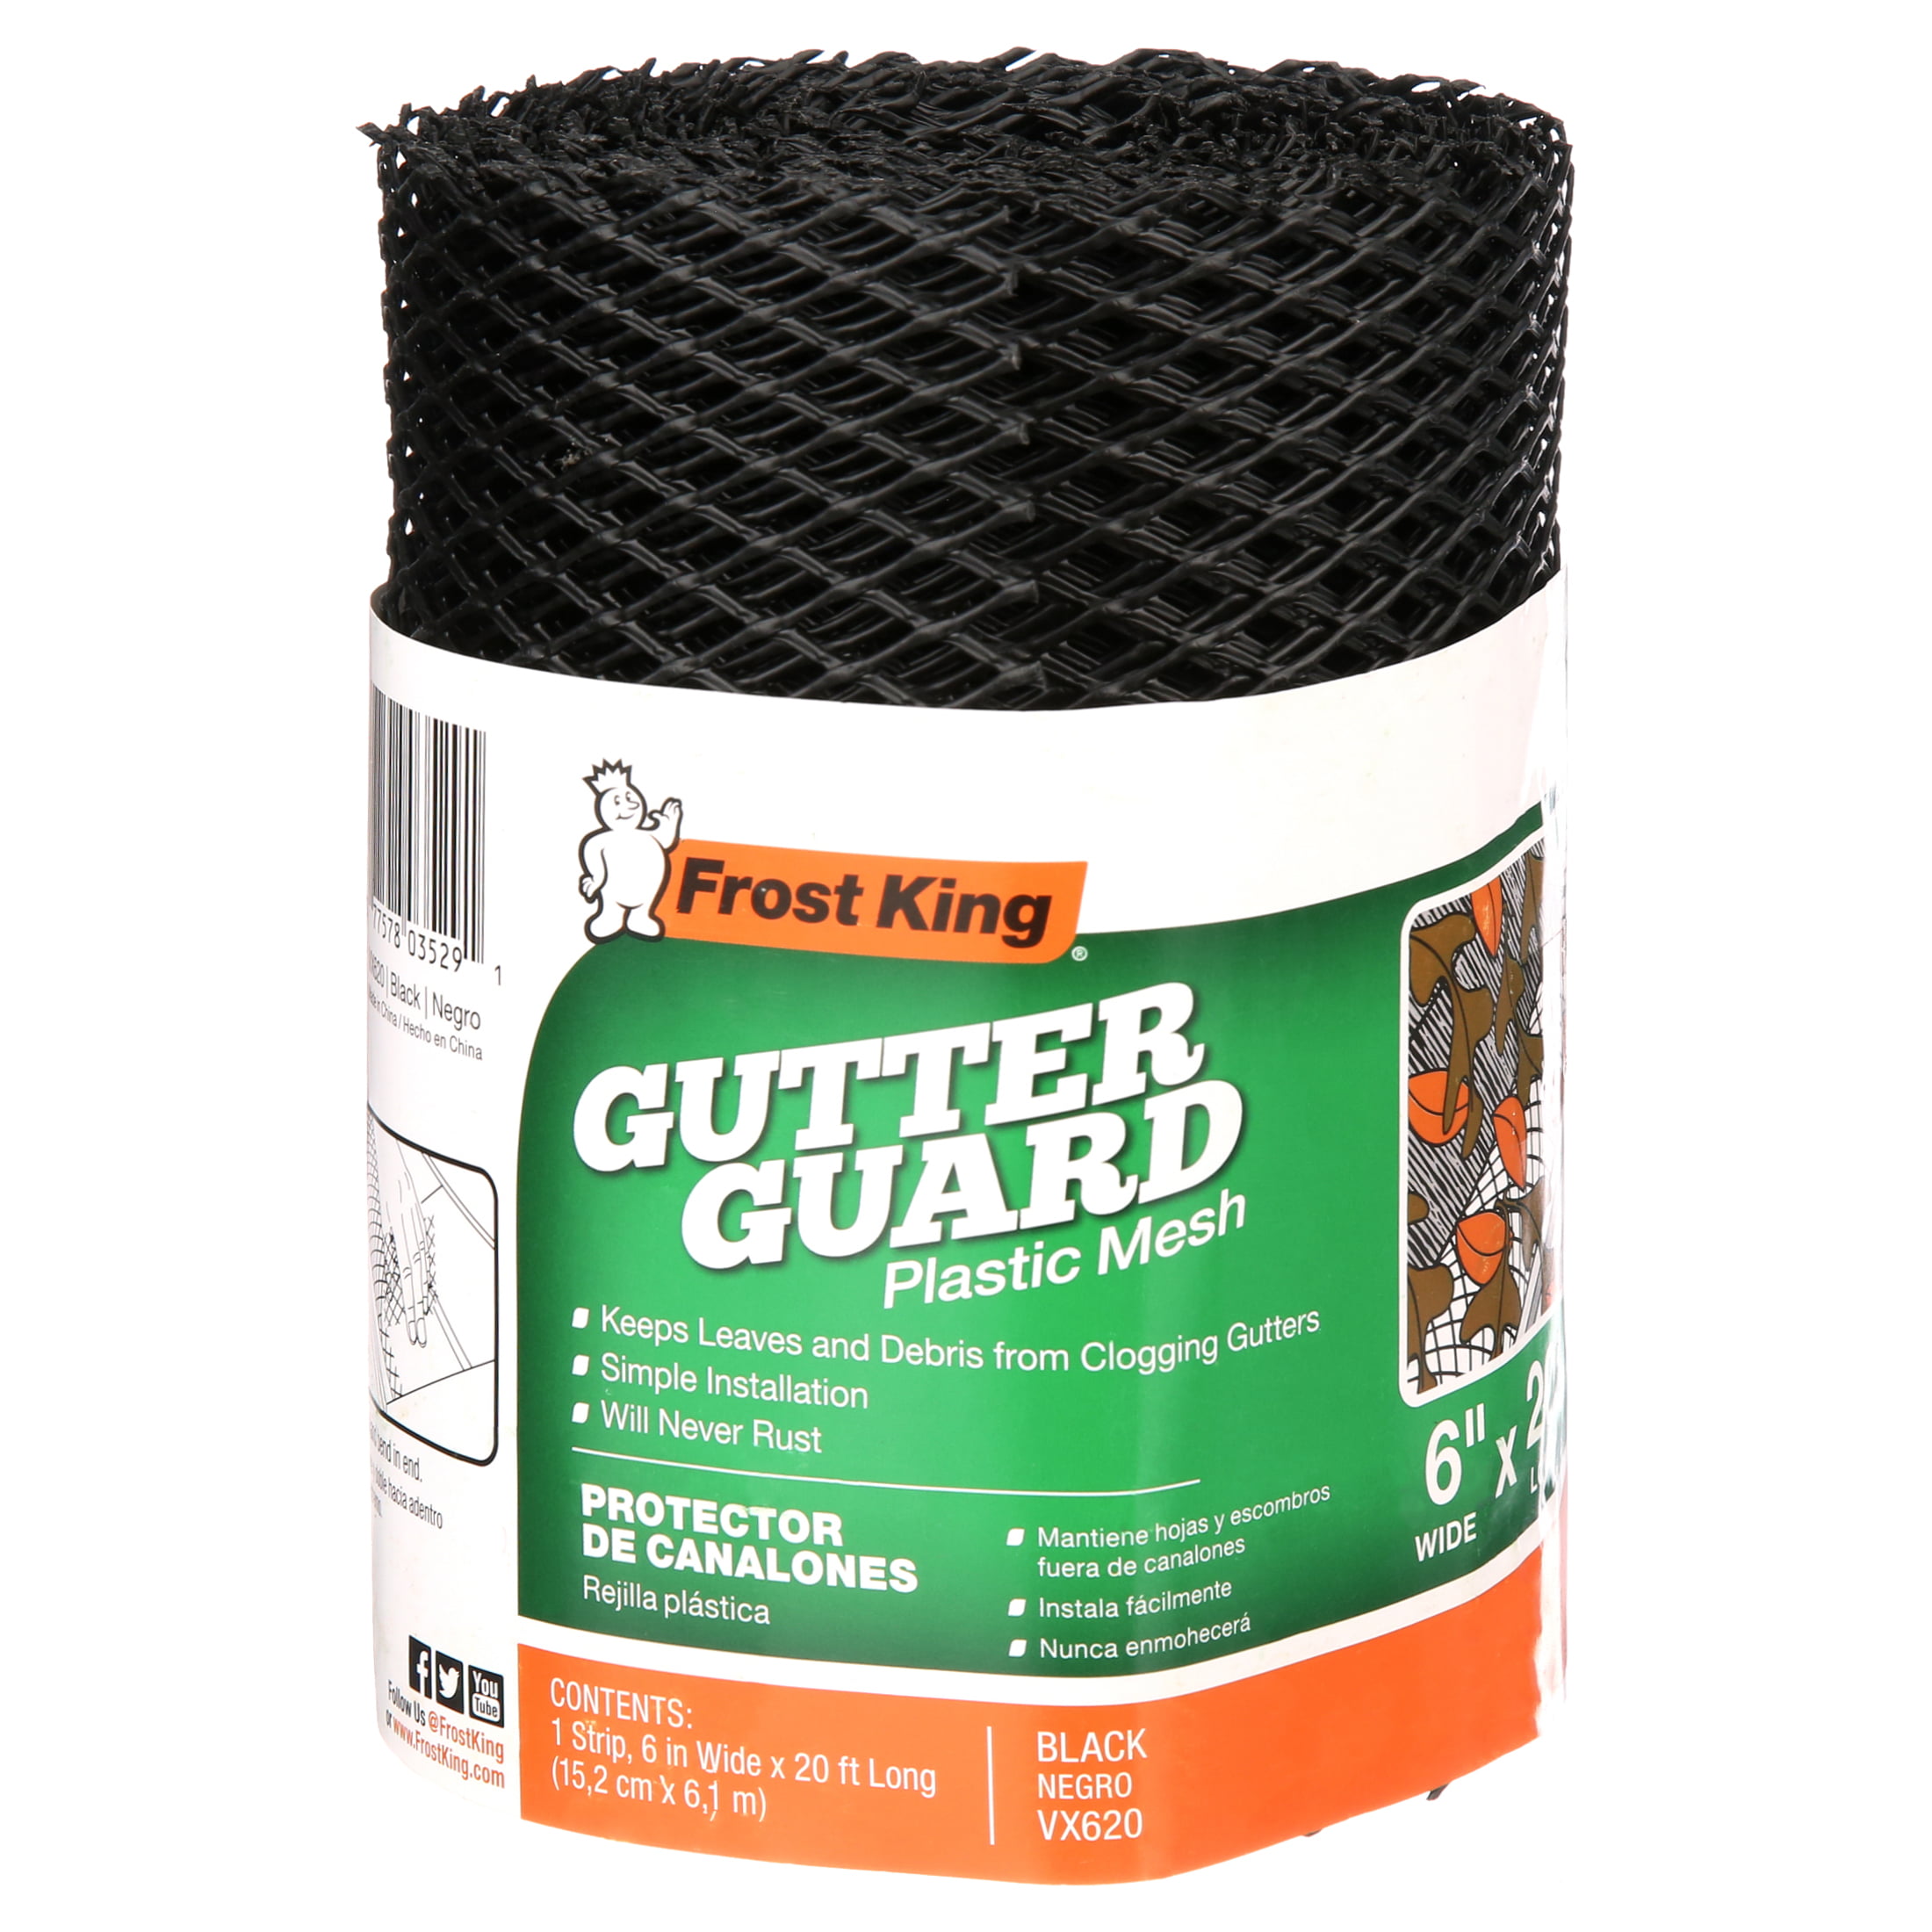 How To Install Frost King Gutter Guard Frost King Plastic Mesh Gutter Guard - PACK OF 6 - Walmart.com